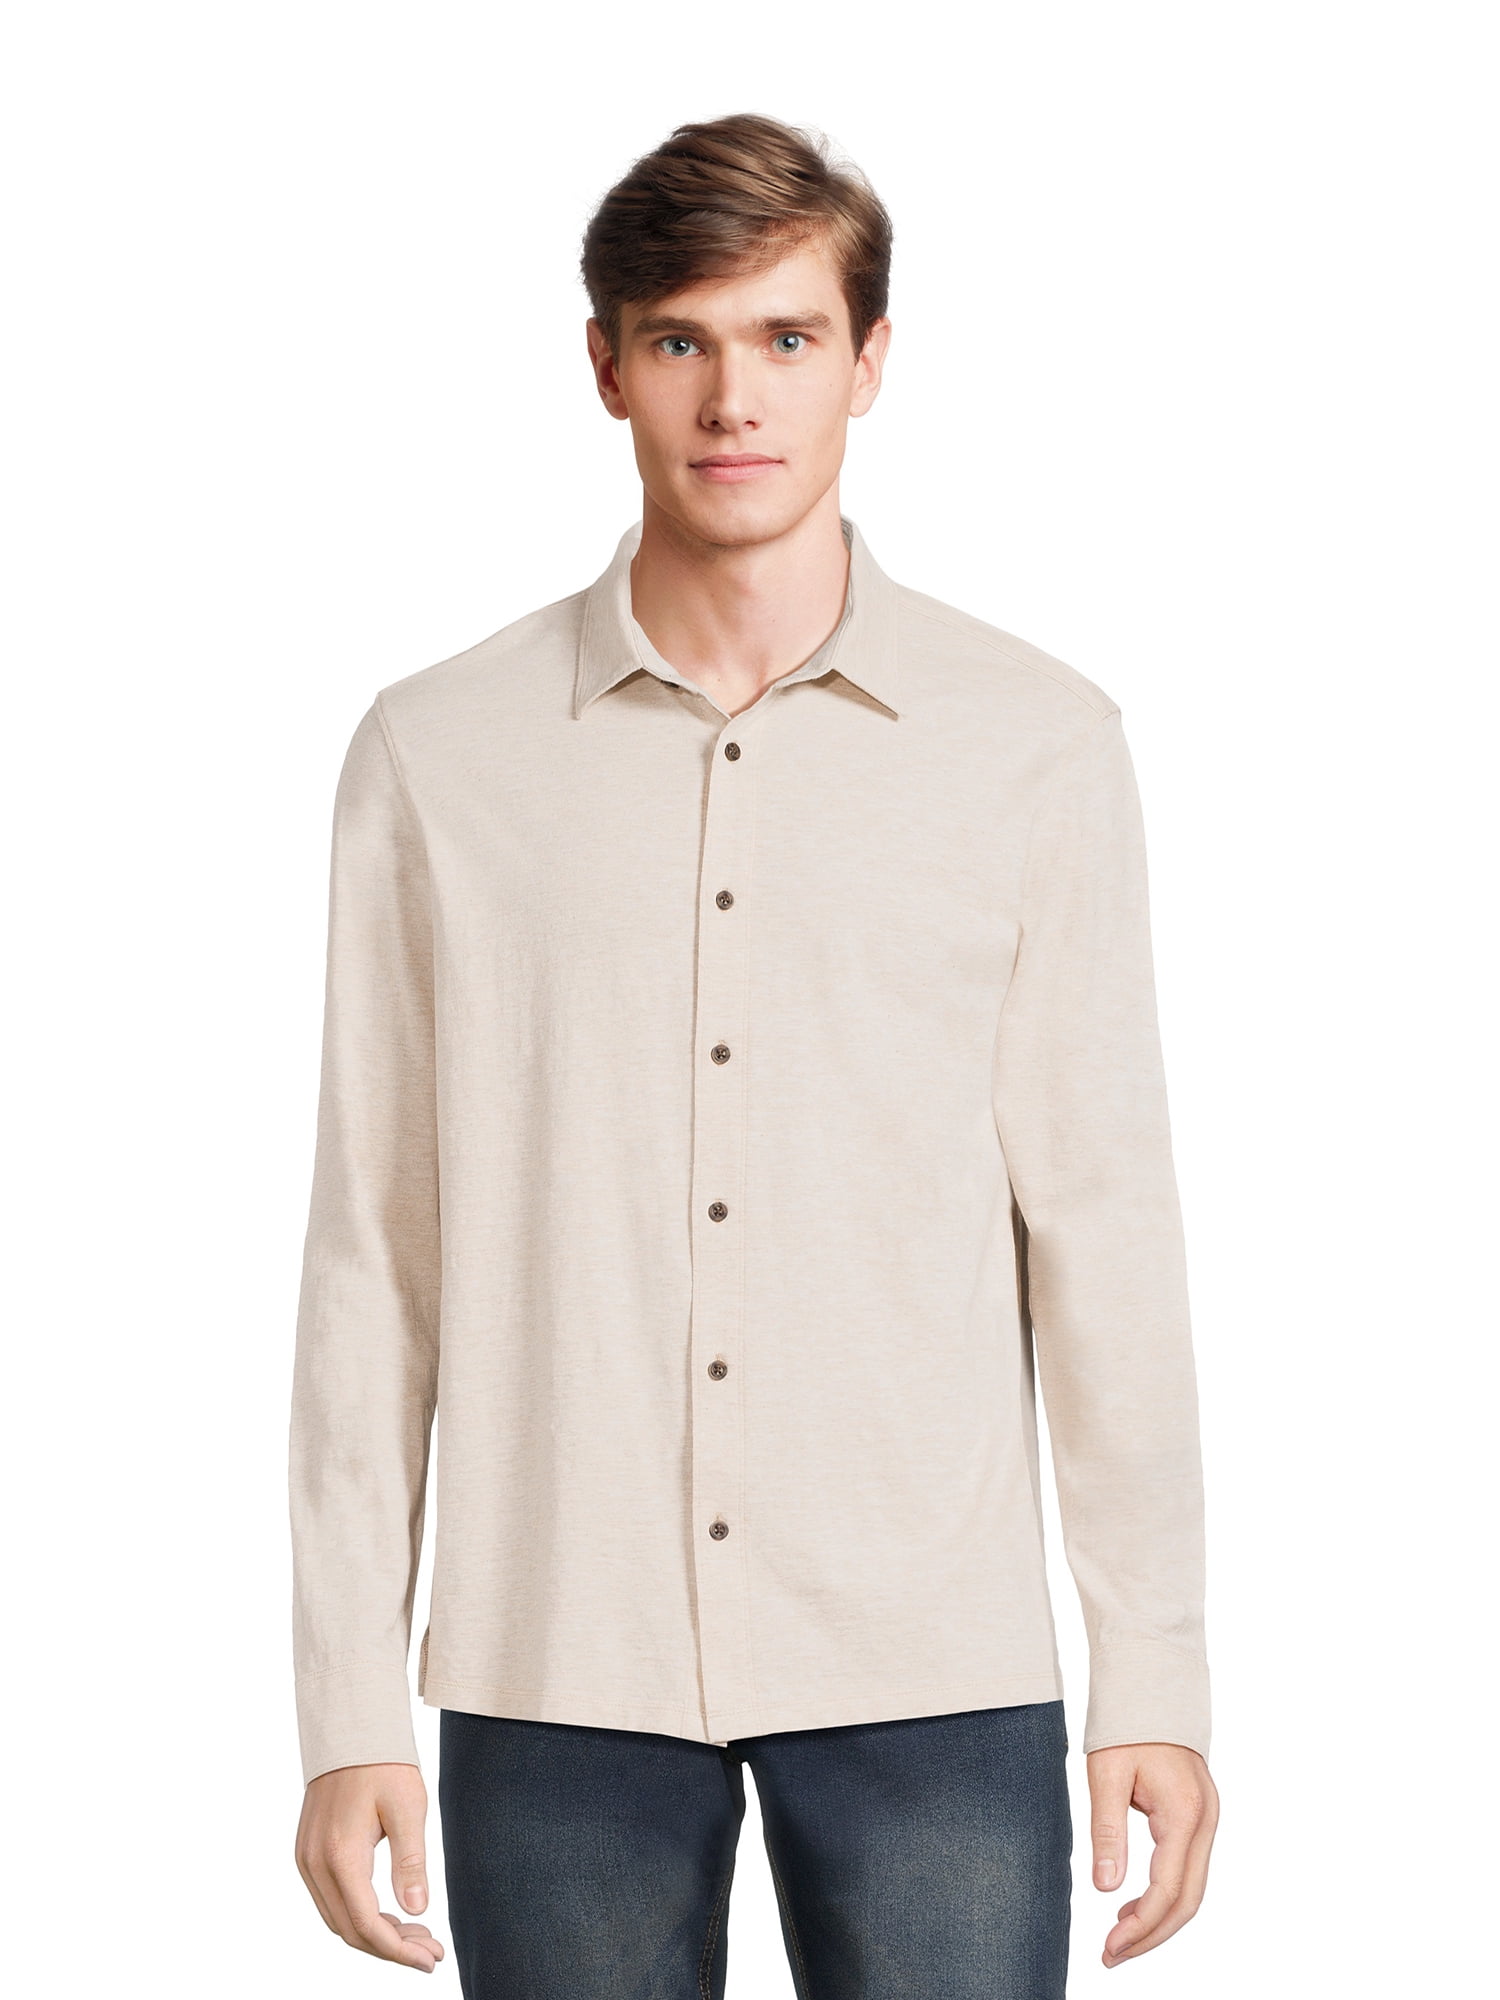 George Men’s Knit Button Down Shirt with Long Sleeves, Sizes S-3XL